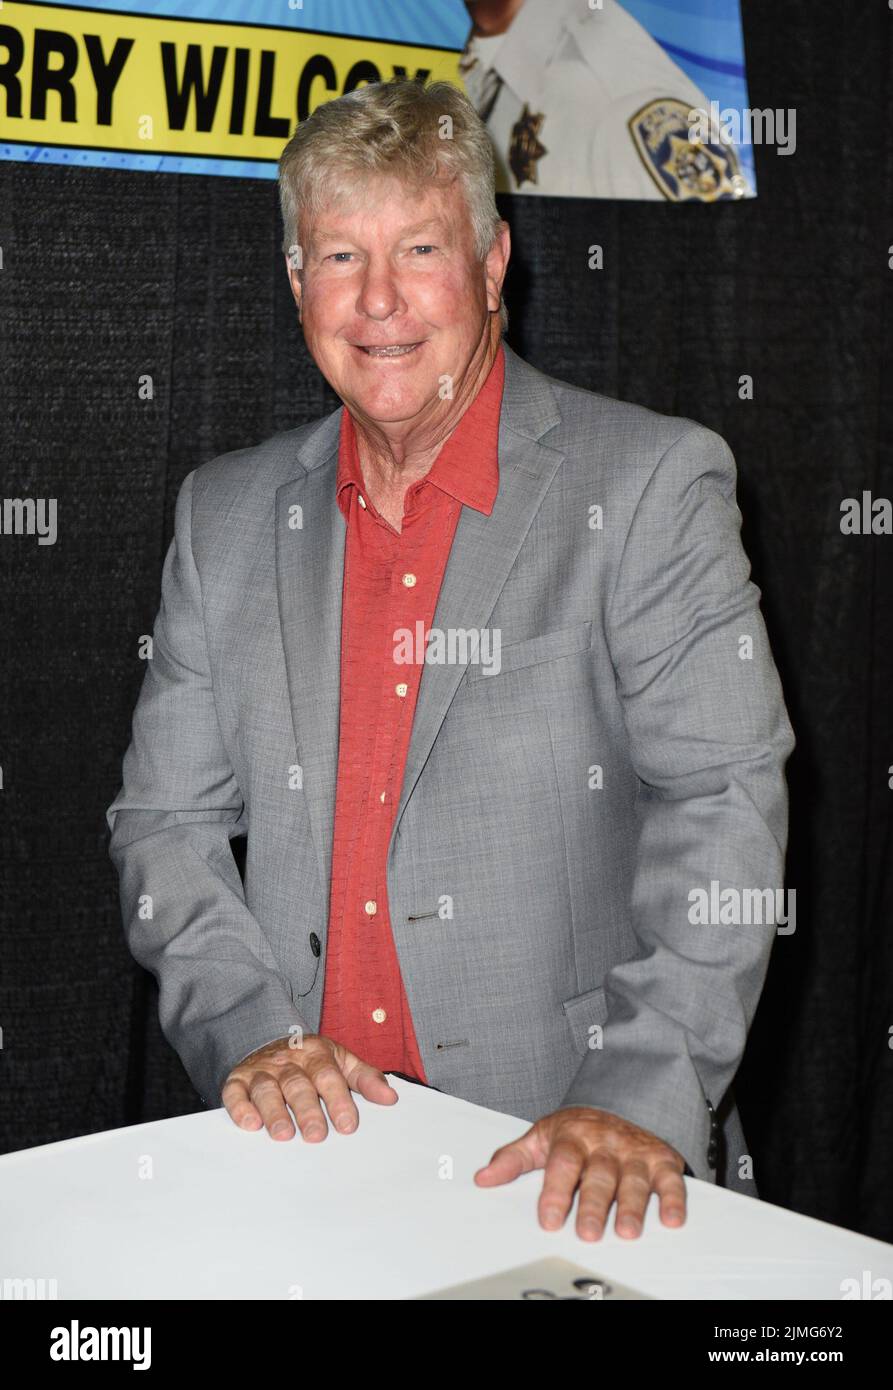 Knoxville, TN, USA. 5th Aug, 2022. Larry Wilcox in attendance for Fanboy Expo 2022, Knoxville Convention Center, Knoxville, TN August 5, 2022. Credit: Derek Storm/Everett Collection/Alamy Live News Stock Photo